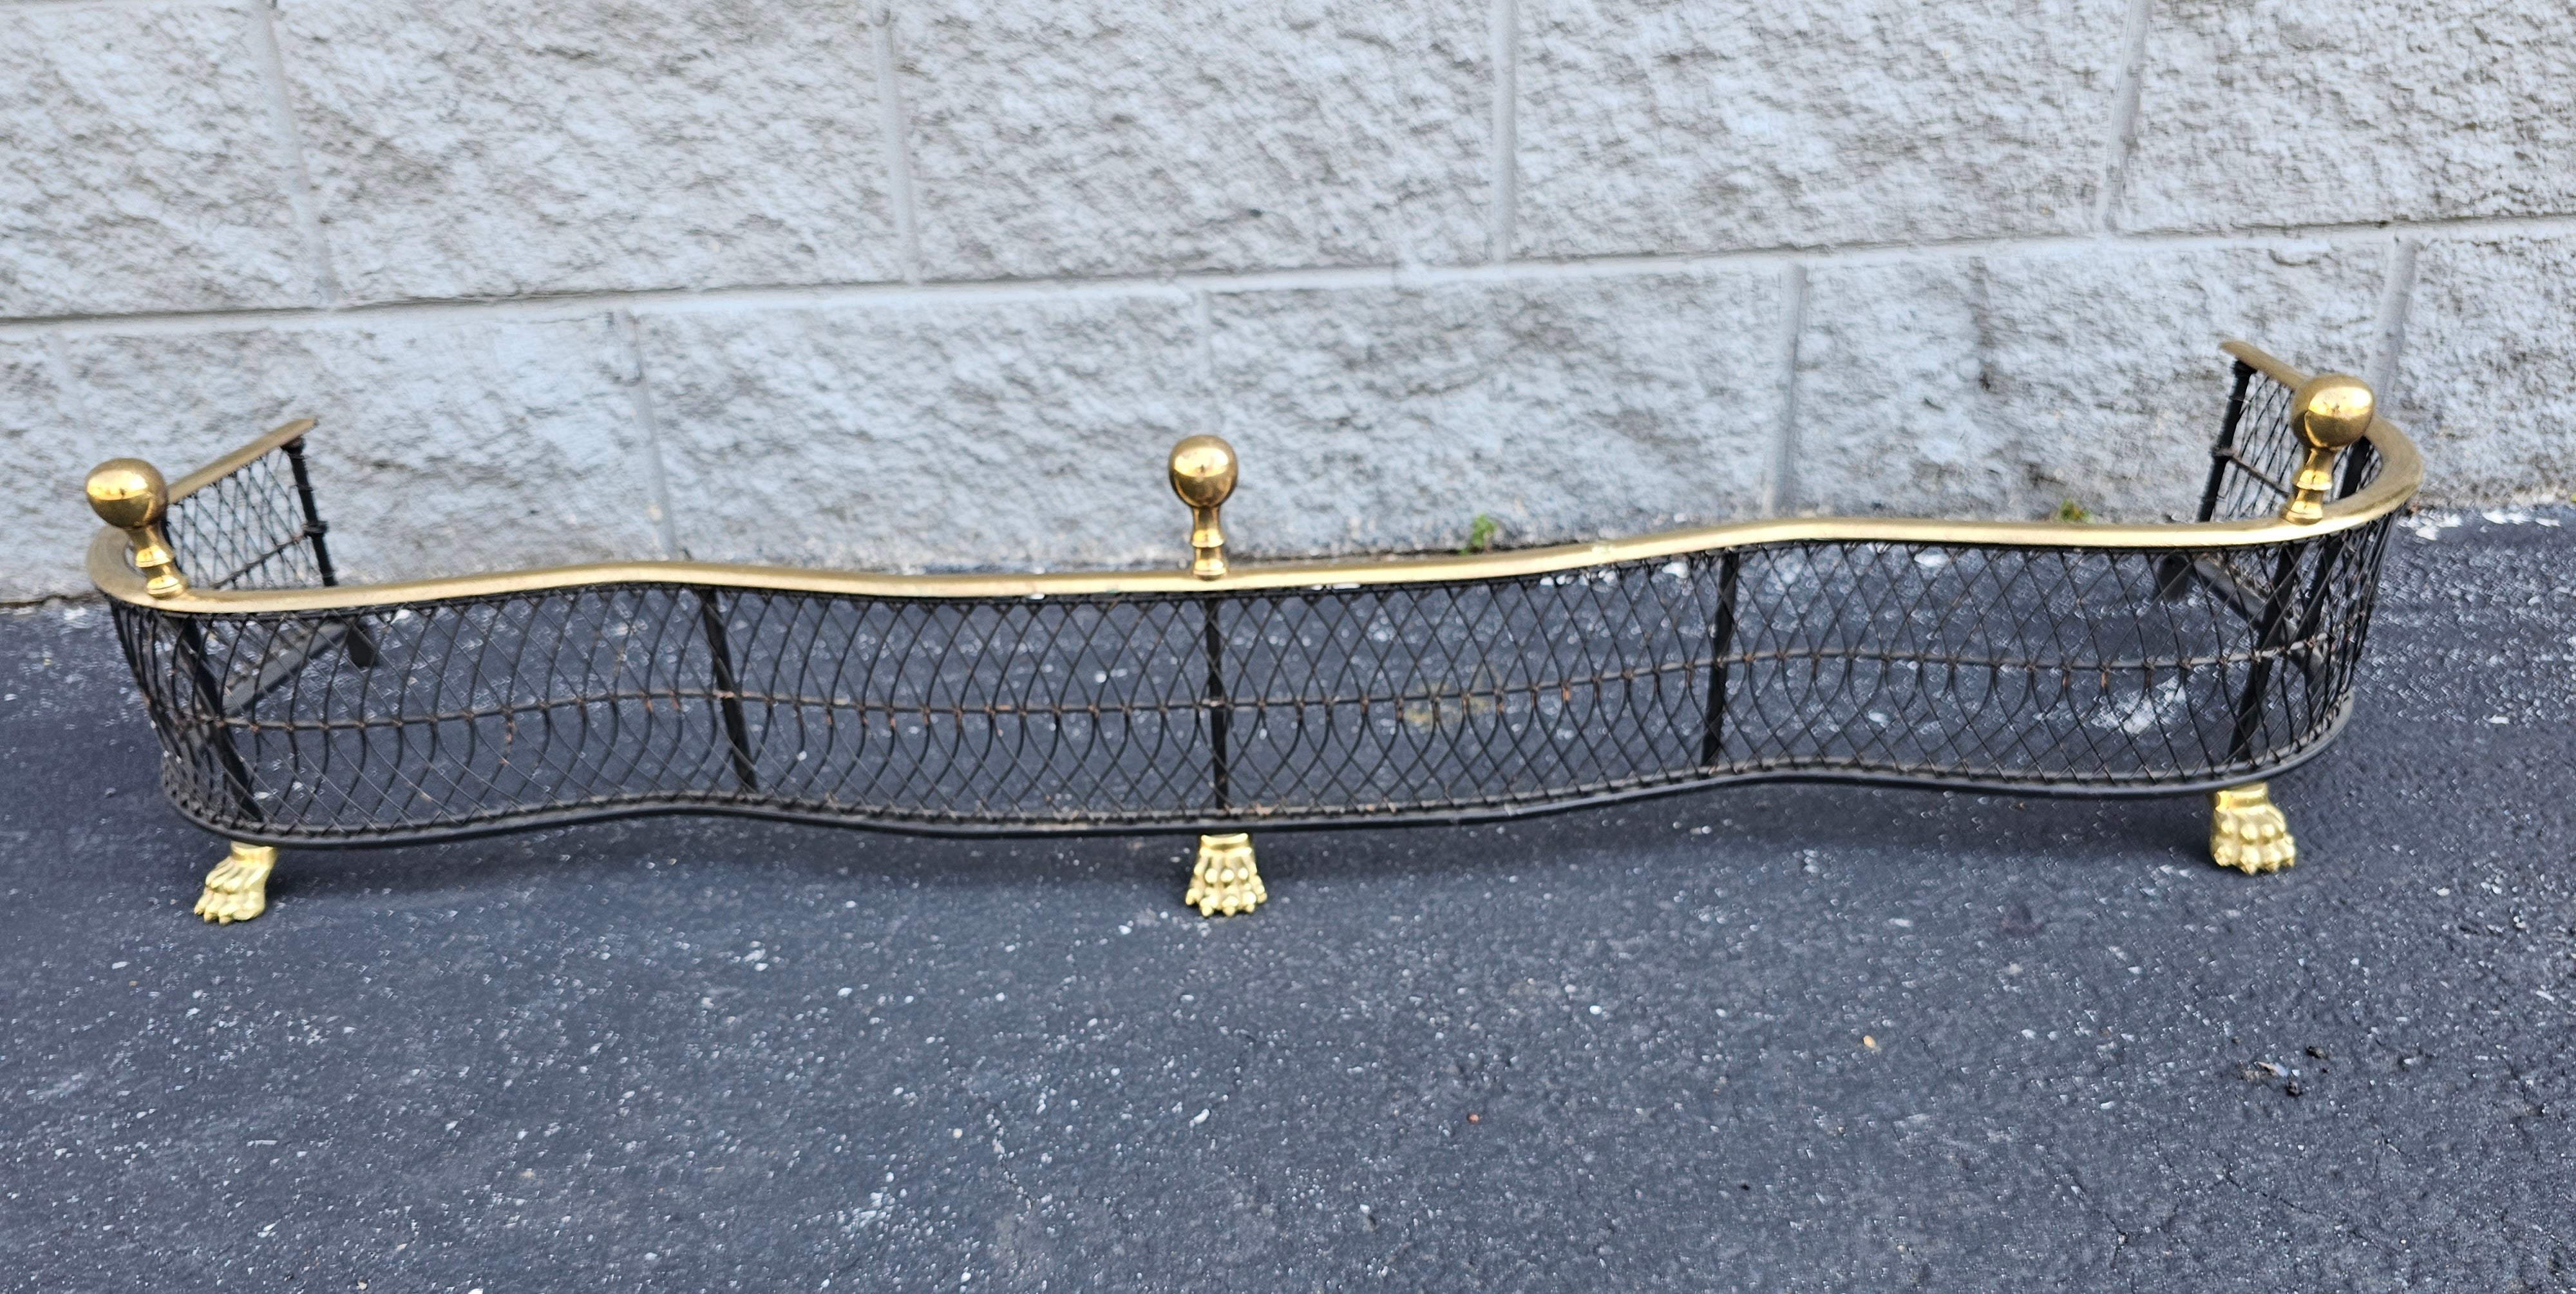 We are offering from a Richmond, Virginia estate a very fine pair of Virginia Metalcrafters (Harvin) brass and iron wire mesh in the 